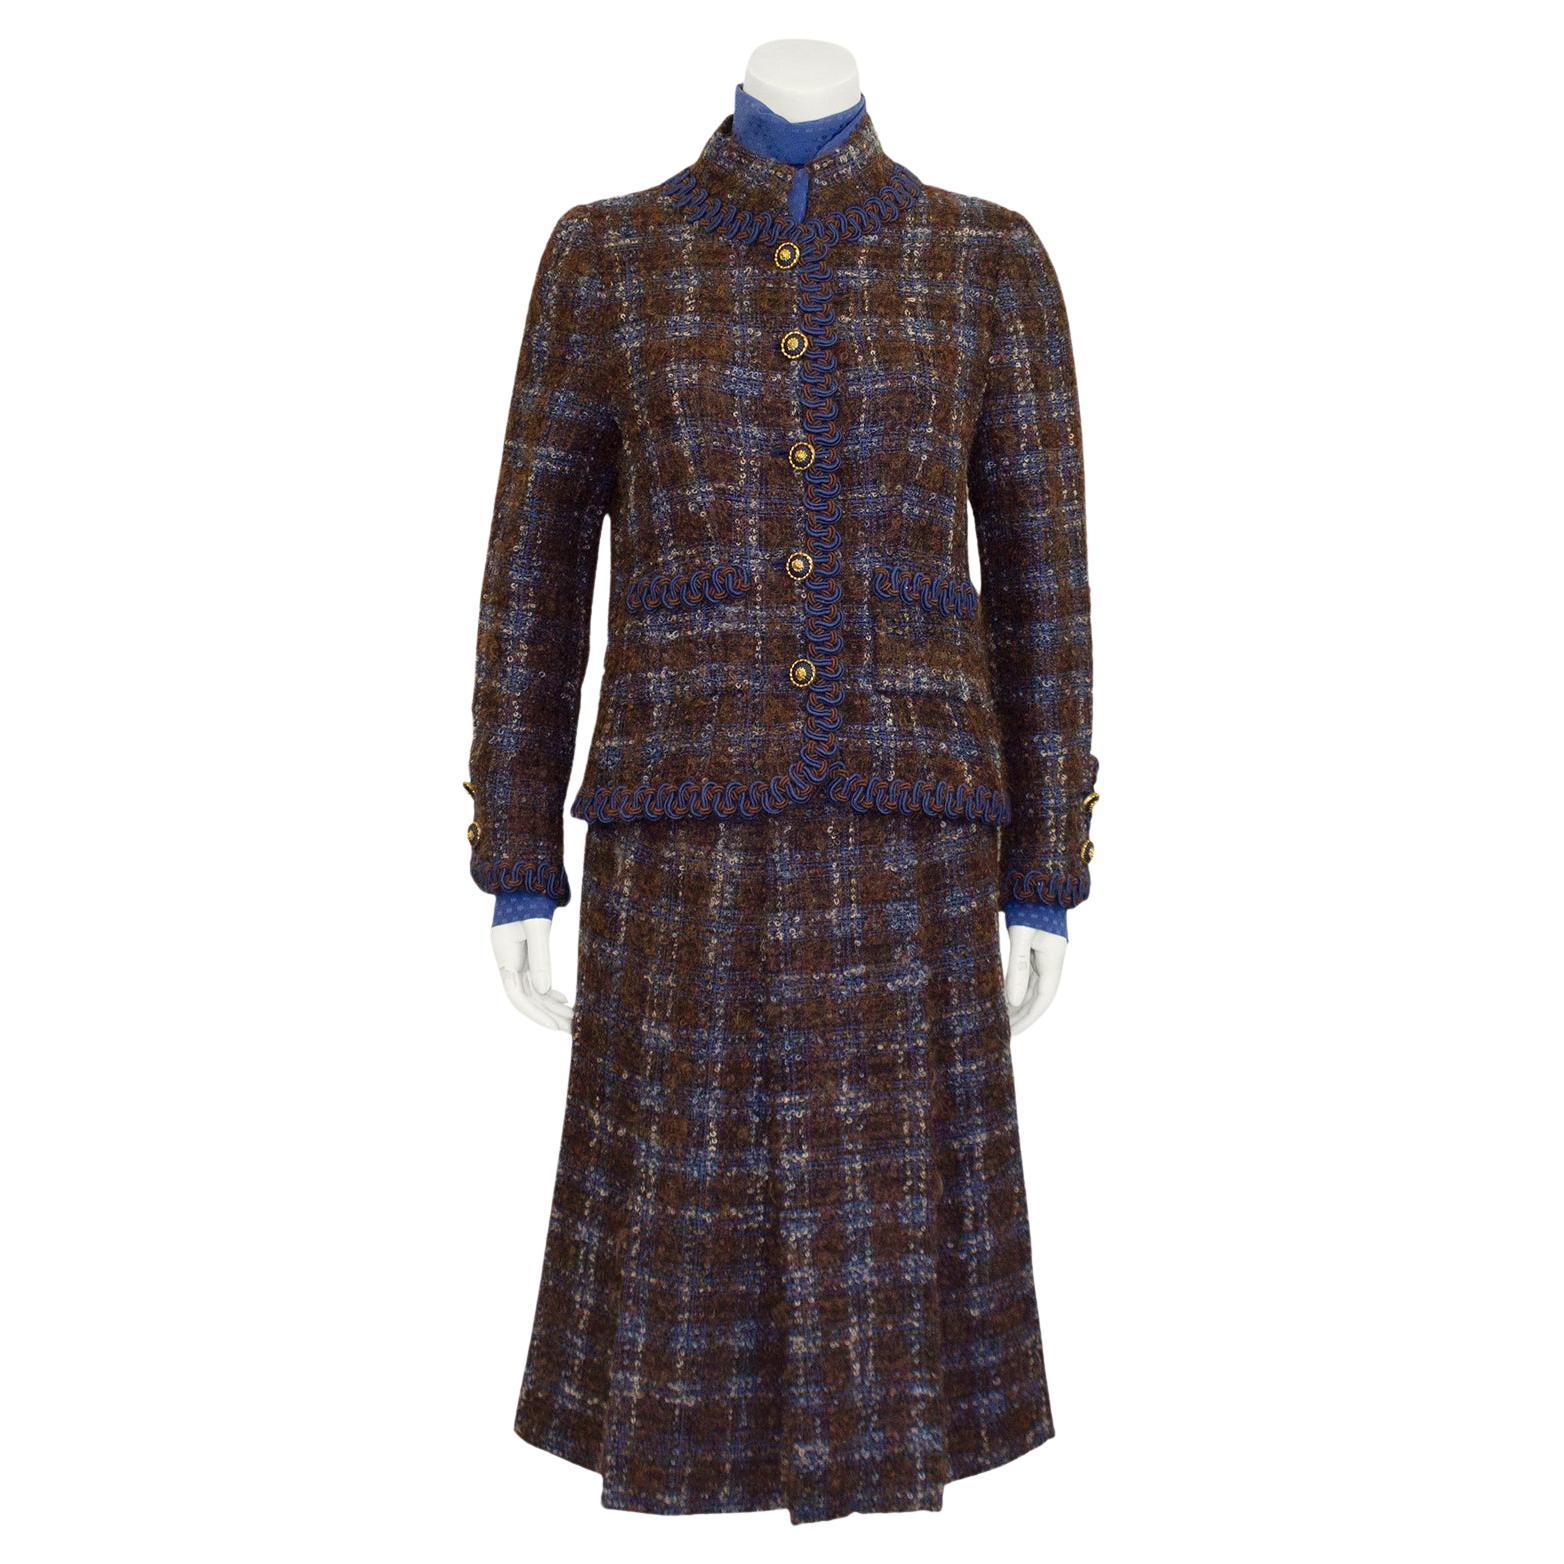 Black 1981 Chanel Haute Couture Blue and Brown Tweed 5 Piece Skirt Suit